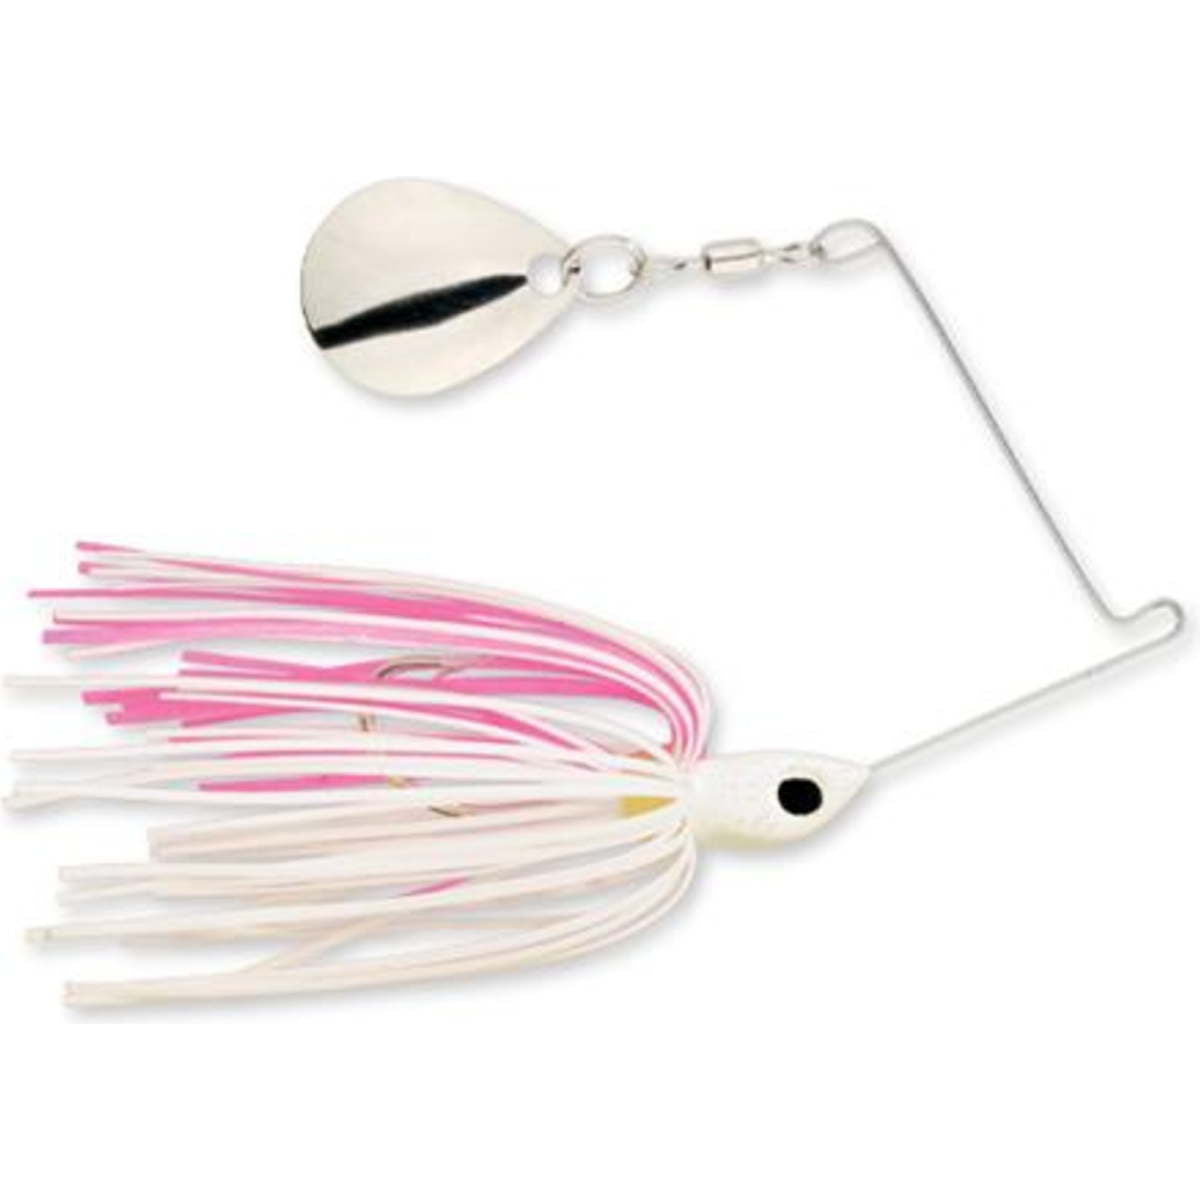 Photo of Strike King Micro-King Spinnerbait - 1/16 oz. for sale at United Tackle Shops.